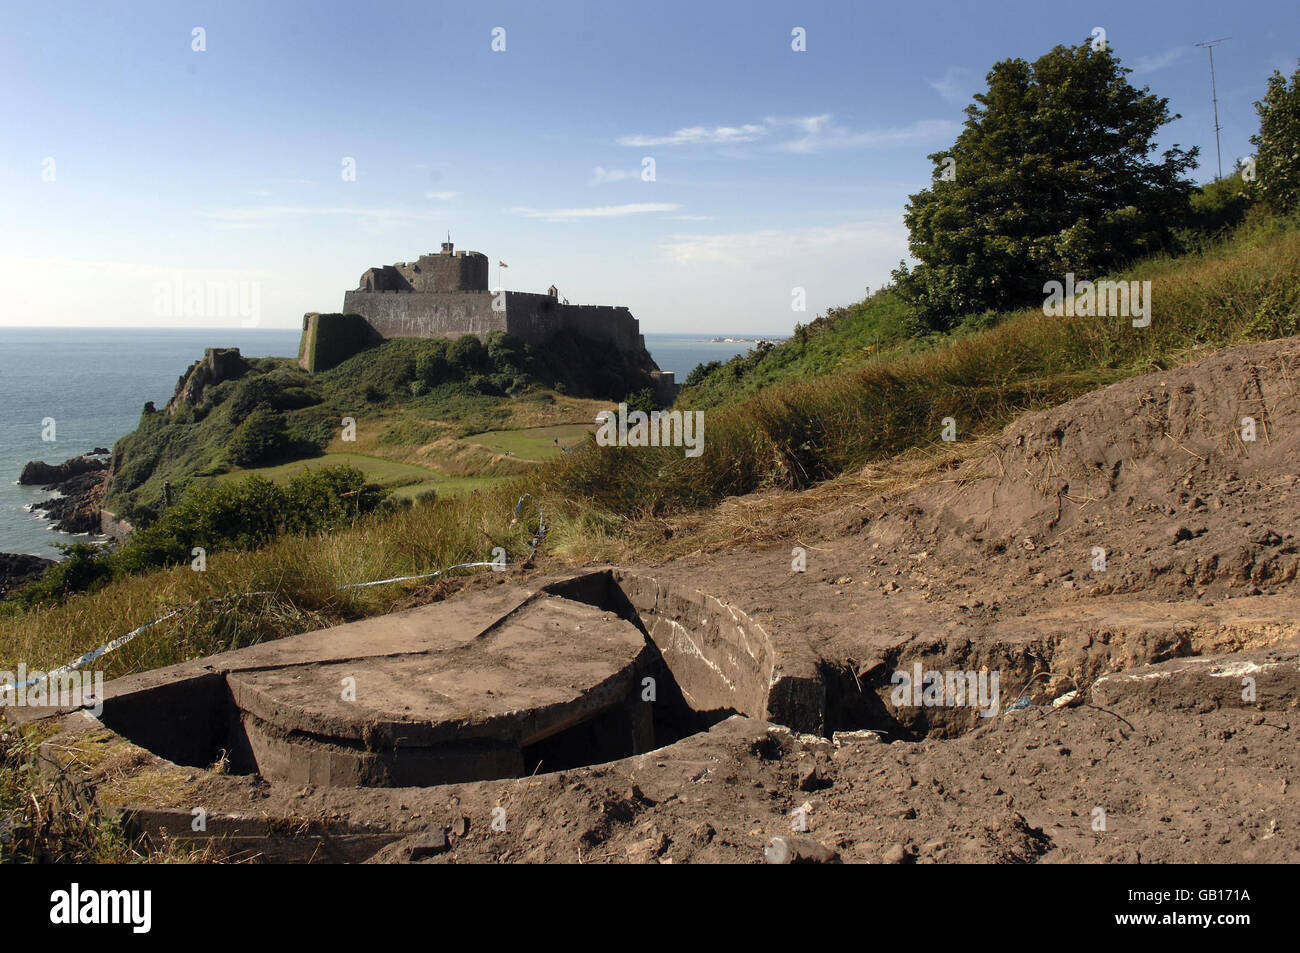 A general view of one of a series of Second World War bunkers near Haut de la Garenne, Jersey. Stock Photo